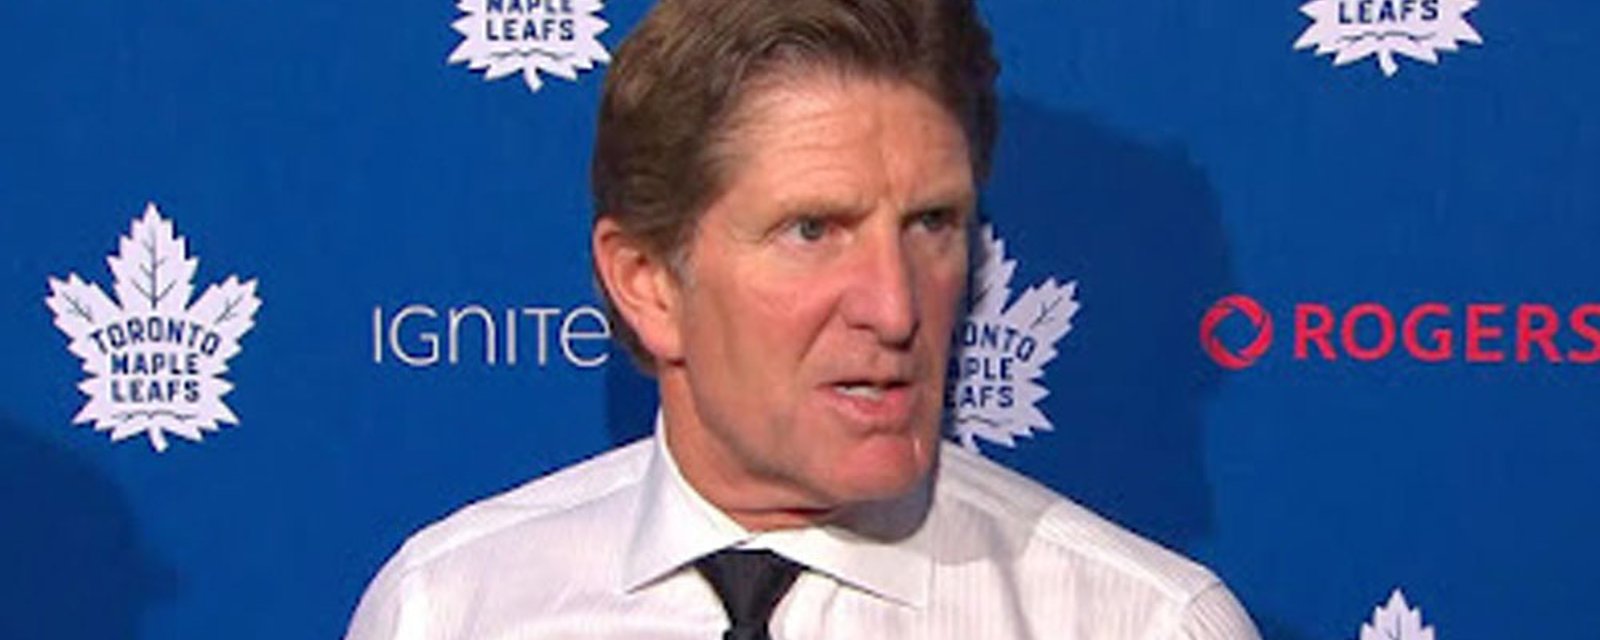 NHL insider Elliotte Friedman issues a warning to Leafs fans calling for Mike Babcock to be fired